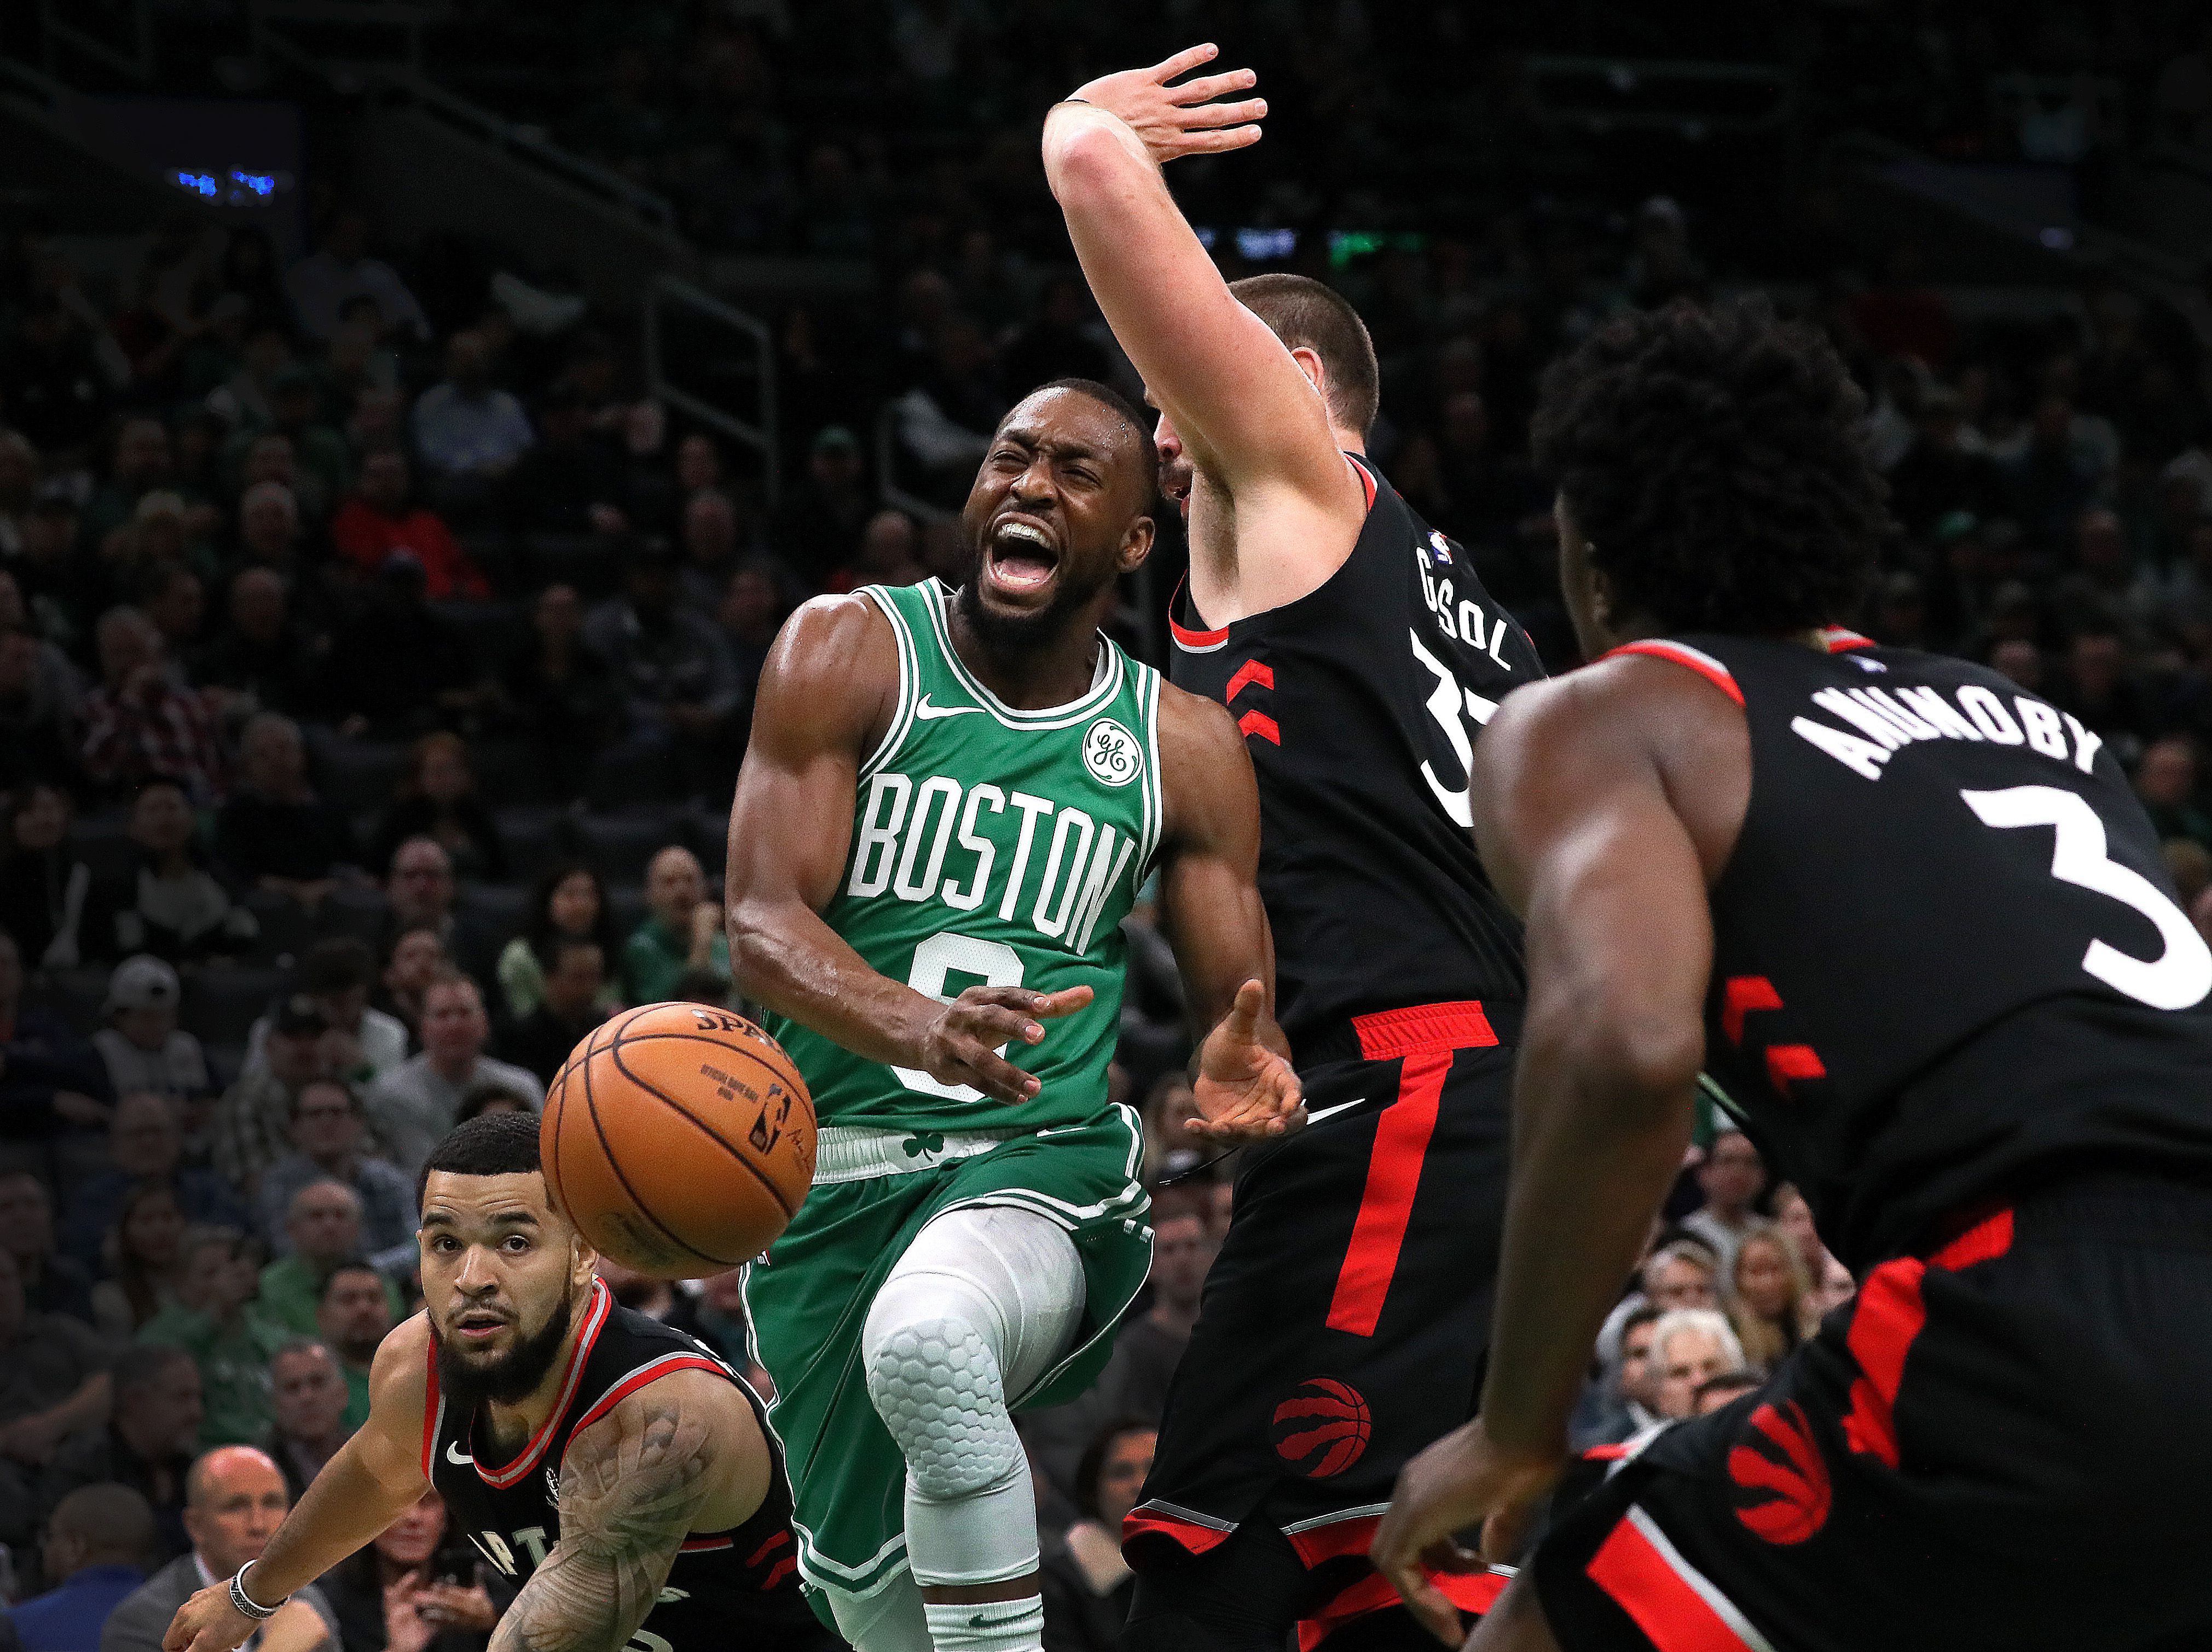 Celtics star Kemba Walker dishes out a special assist to Boston's